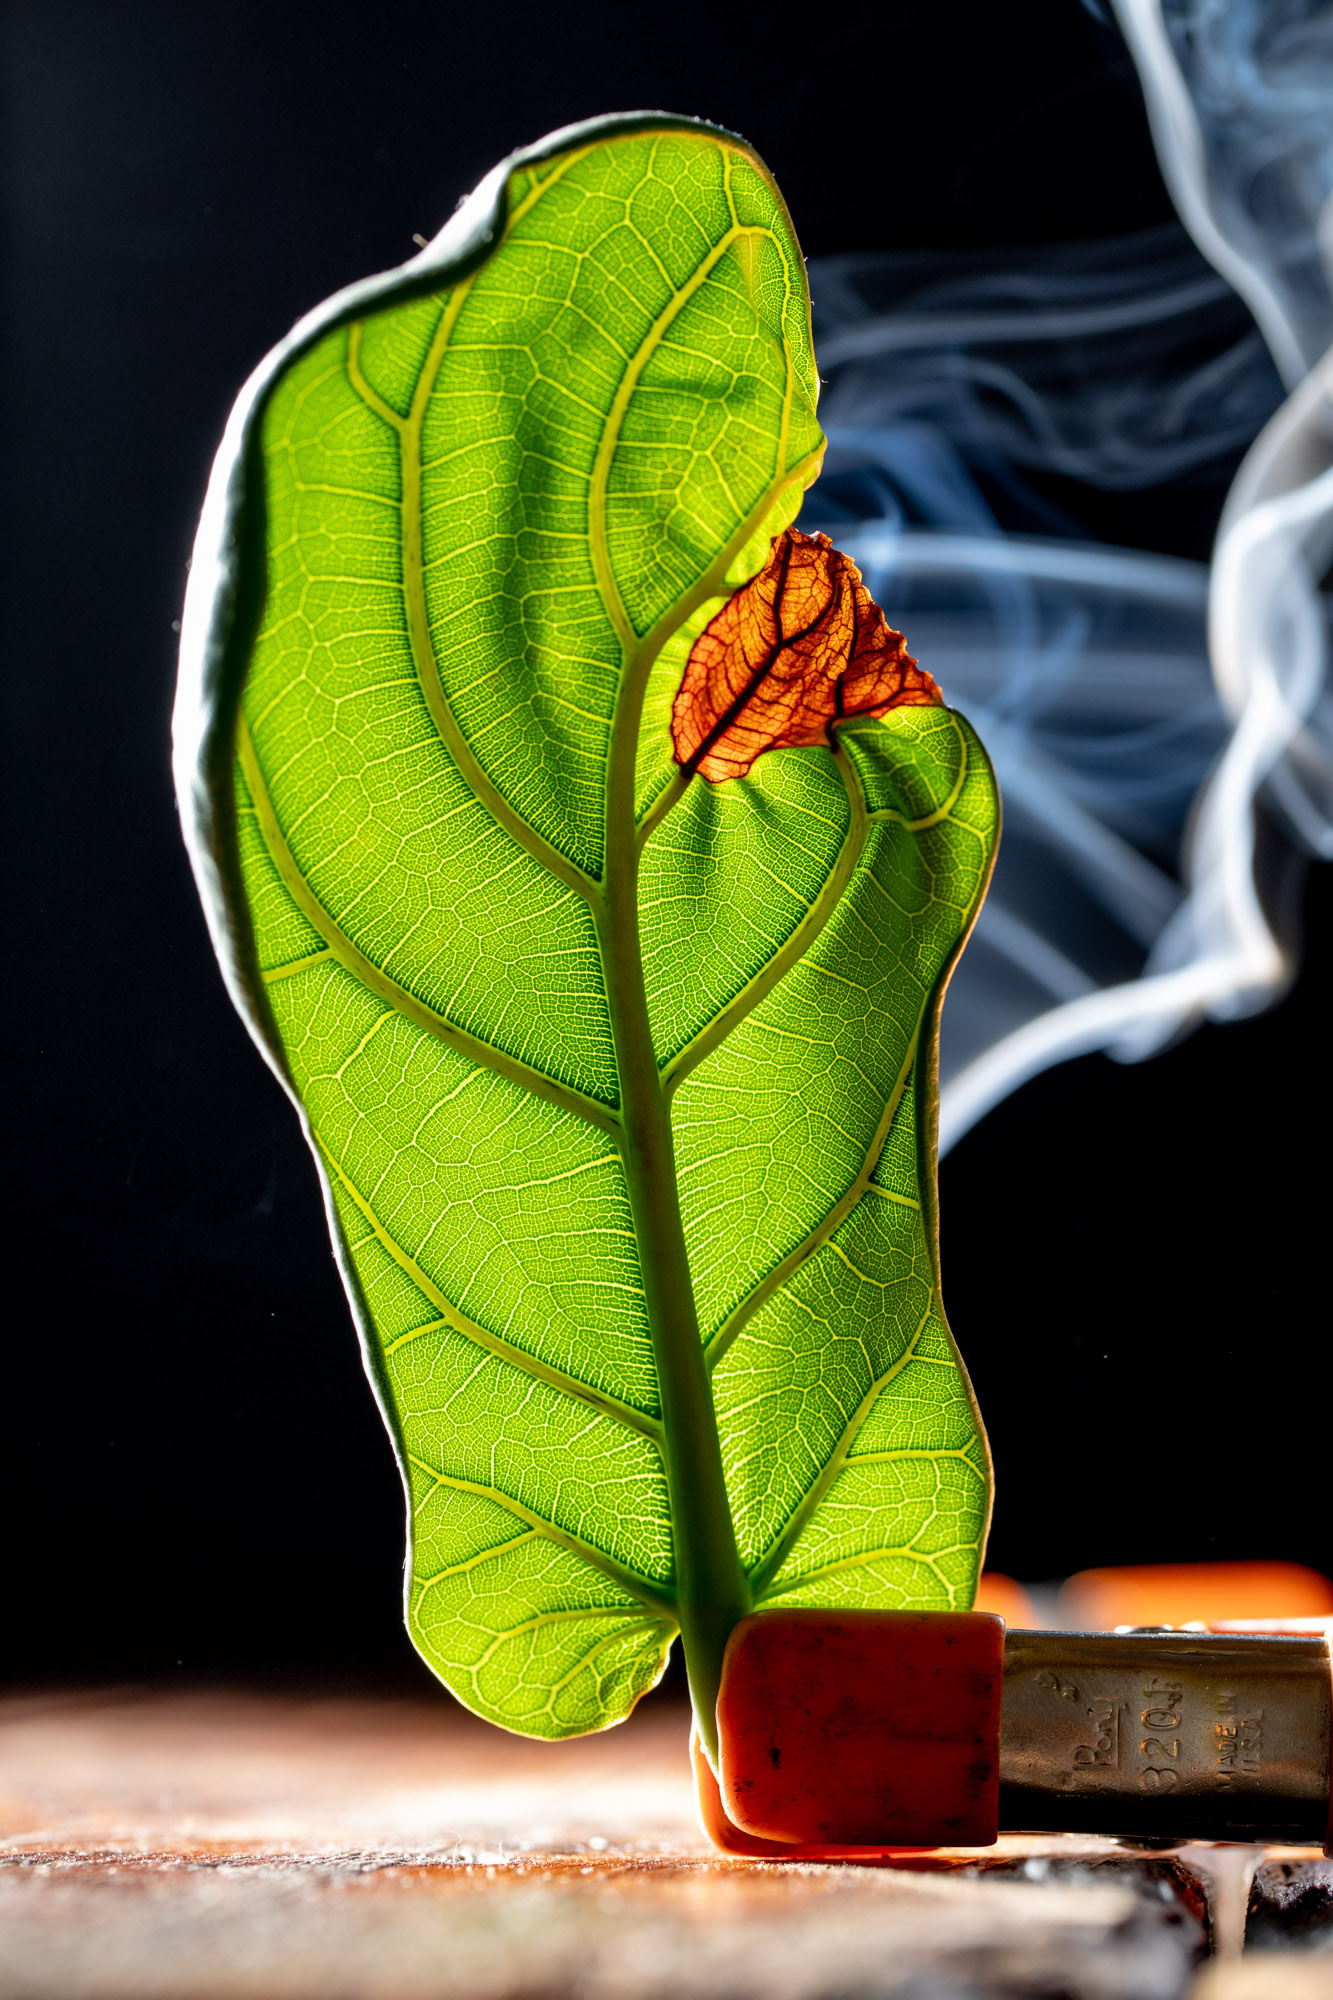 Conceptual artwork of smoke rising from a fiddle tree fig leaf